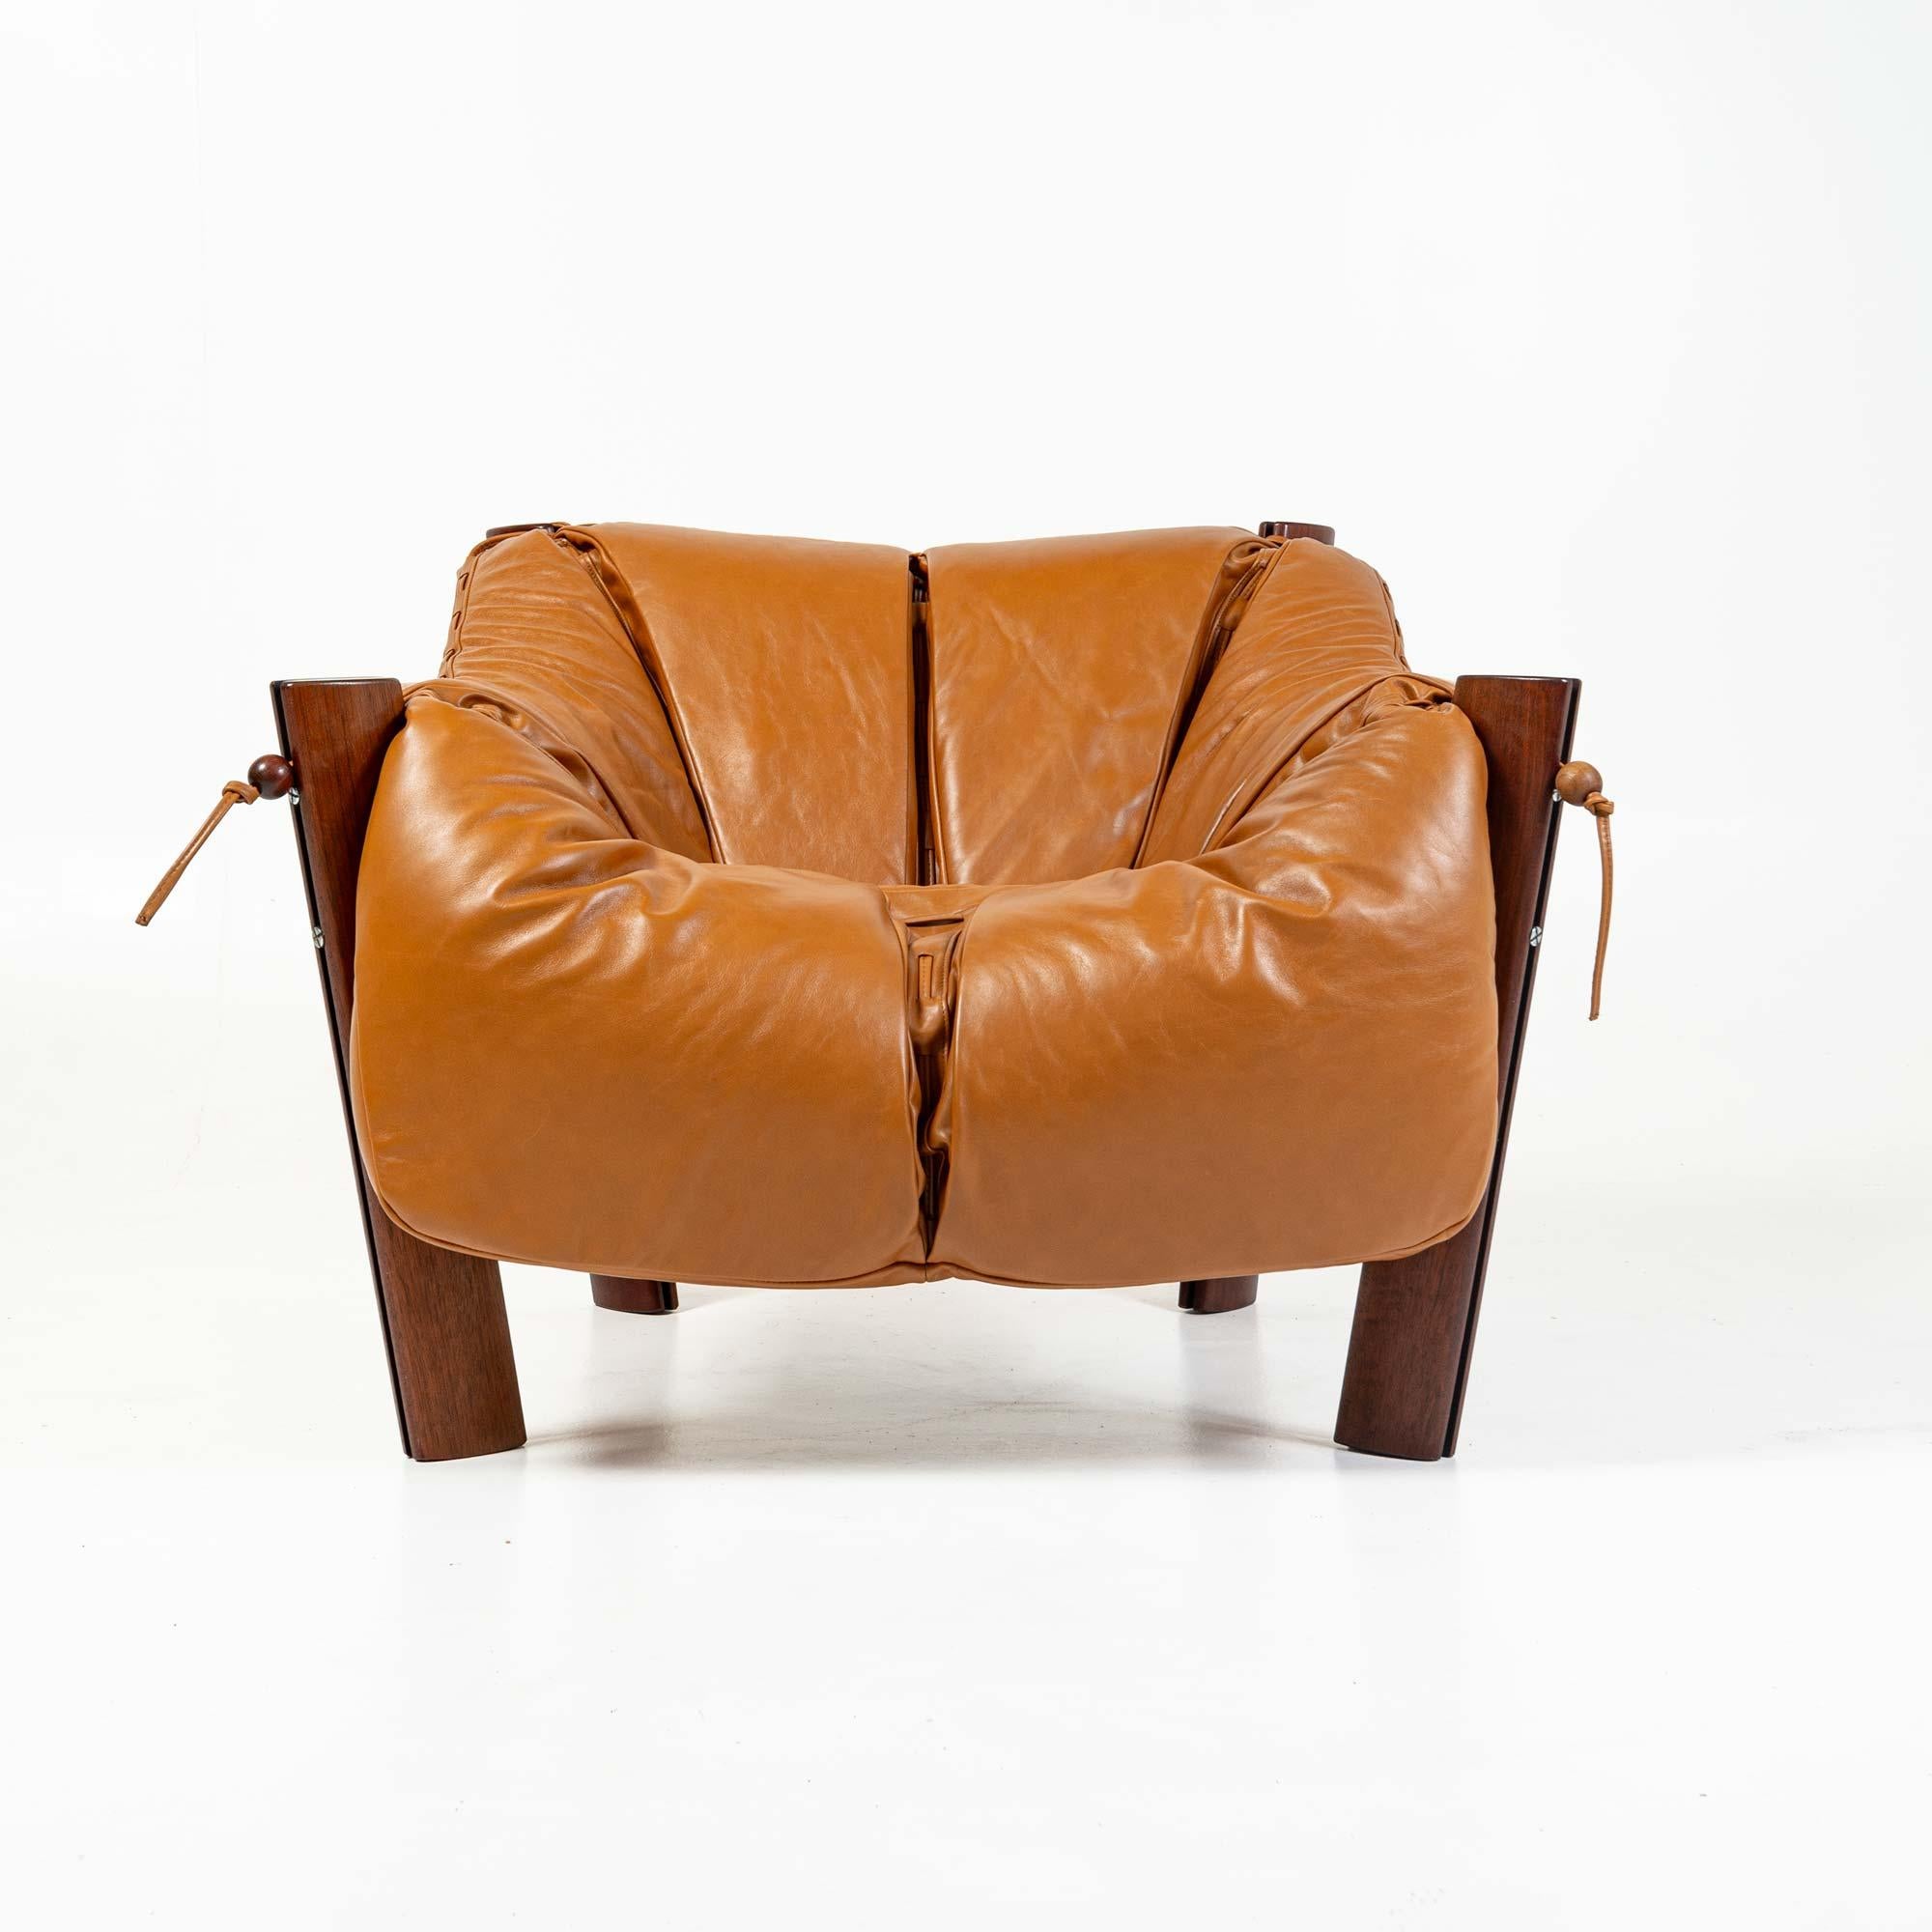 A highly sought after Percival Lafer Lounge chair model MP-211 in original Brazilian rosewood wood and re-upholstered in Maharam Sorghum cognac leather. In his unique designs, Lafer sought ergonomy and comfort making this sofa a true statement. It's